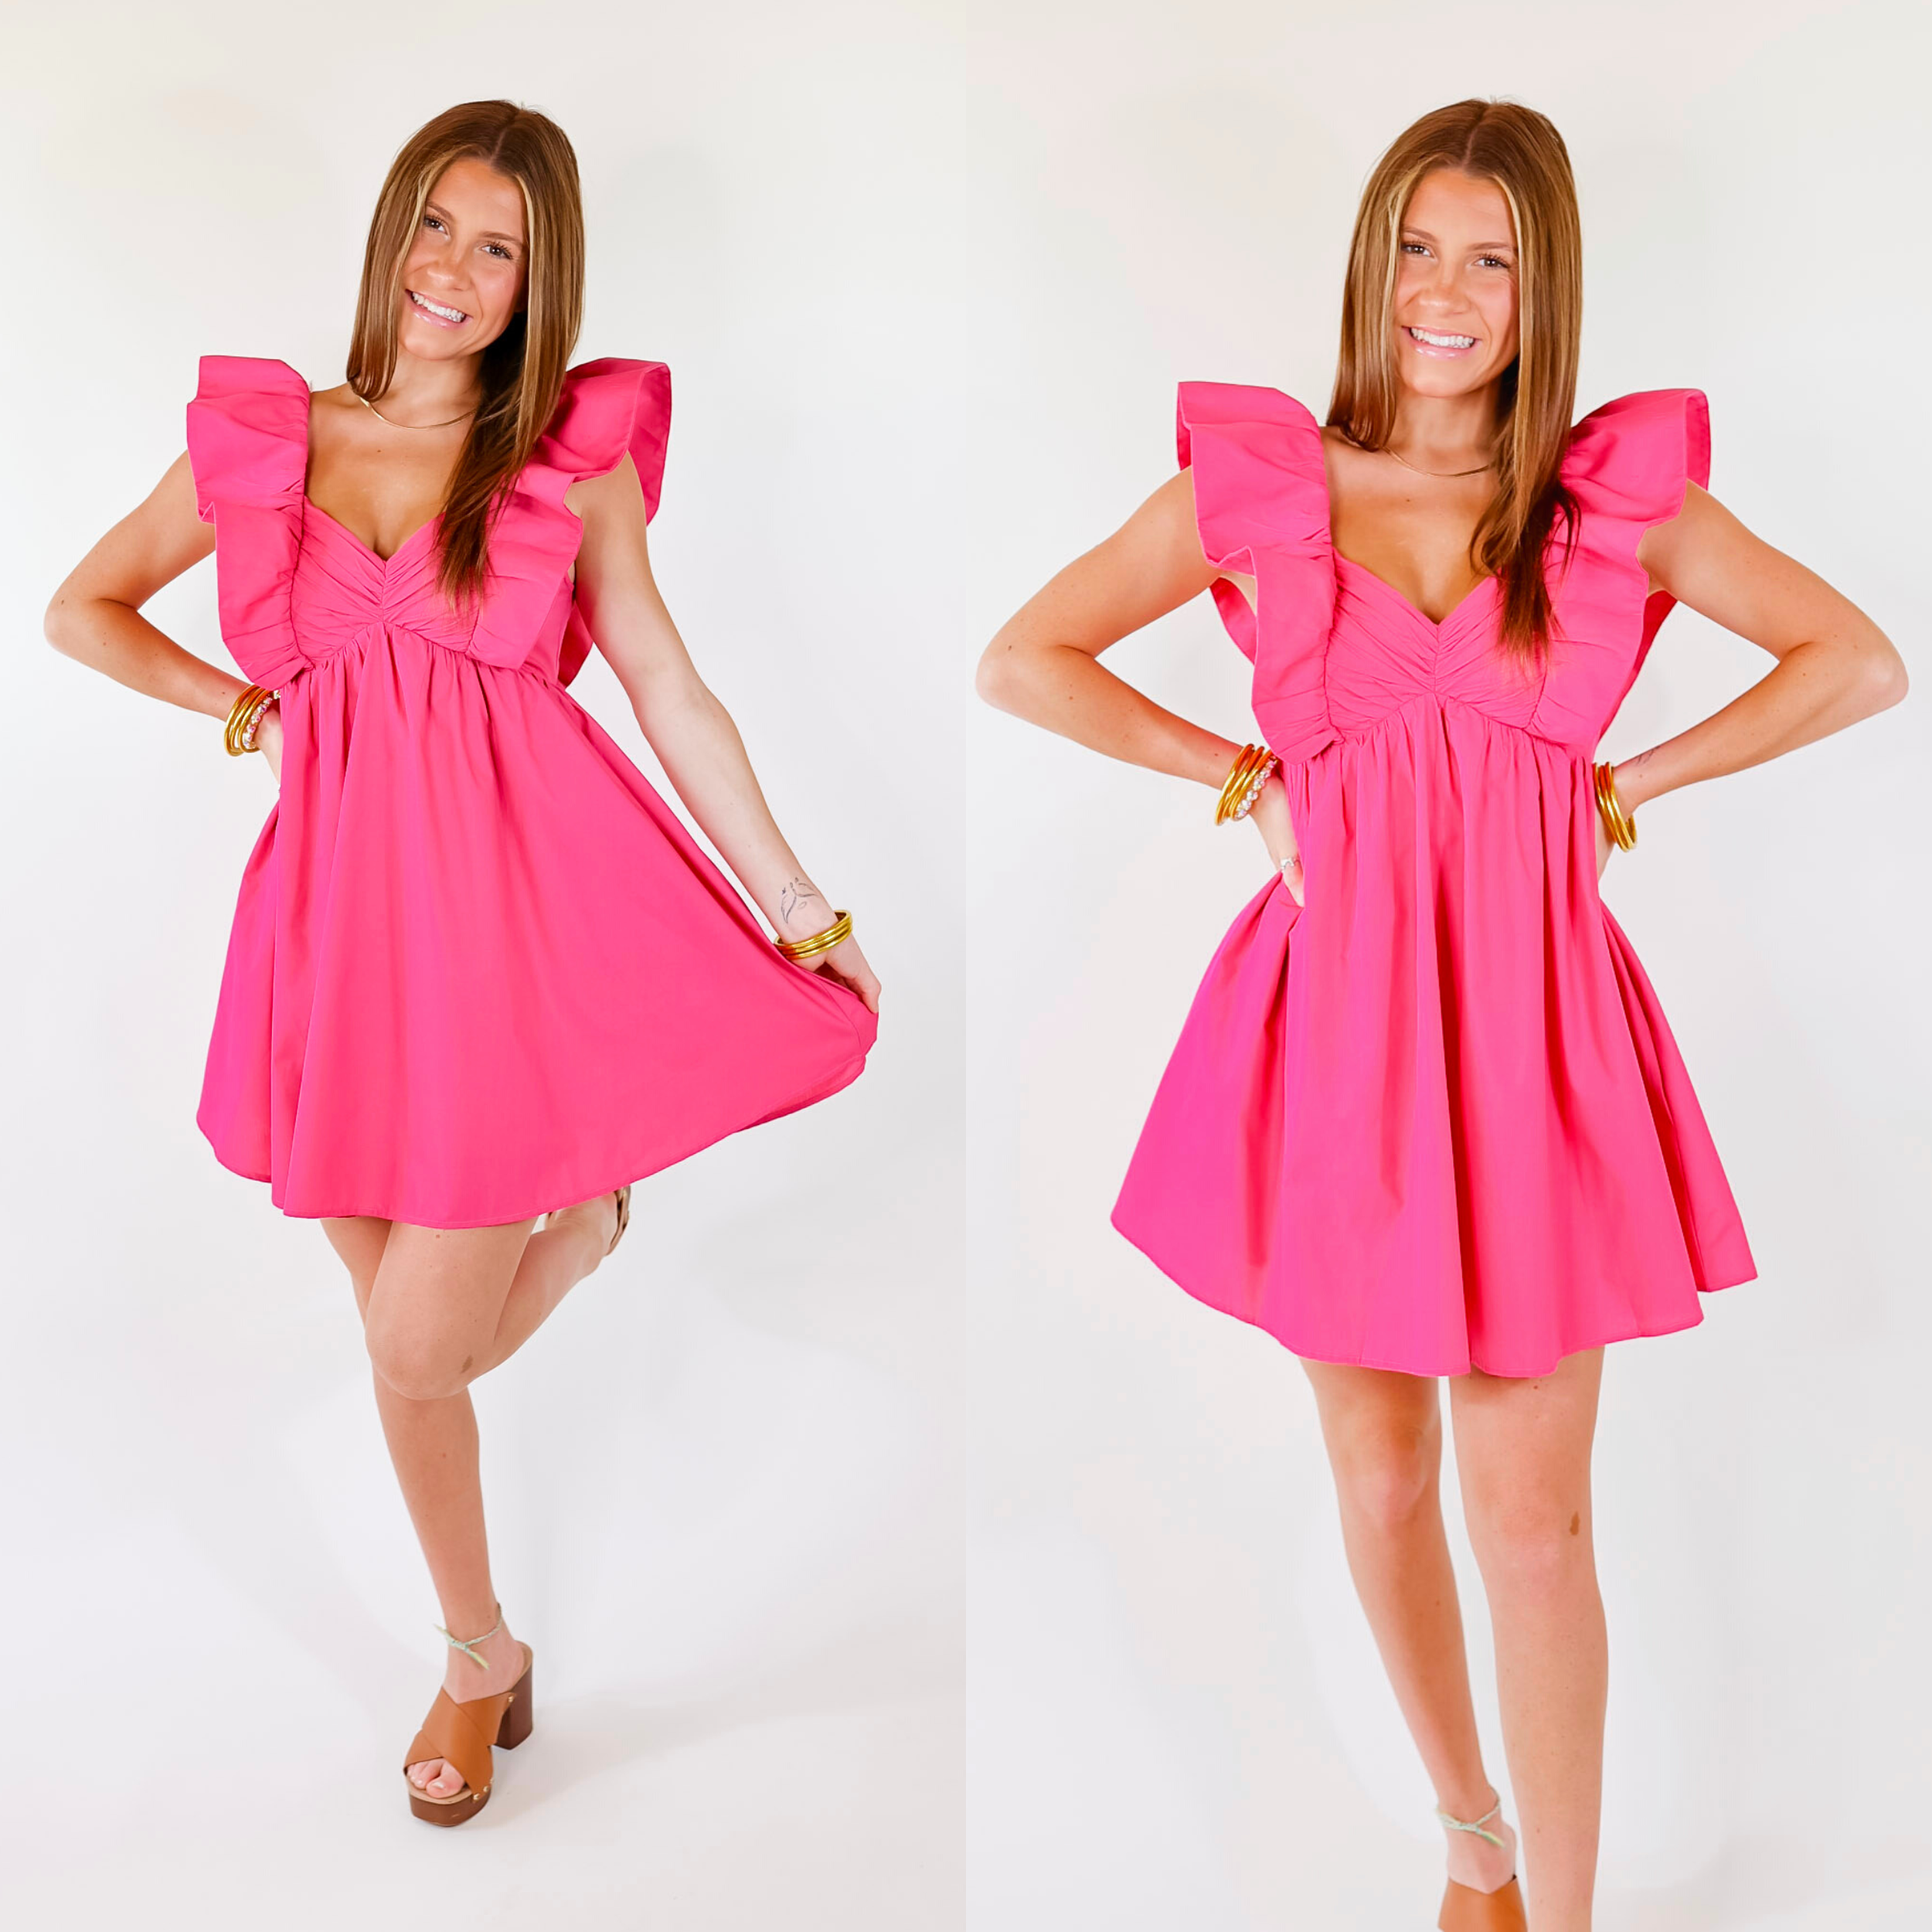 Model is wearing a short pink dress featuring ruffle sleeves, pleated bodice, and a pleated skirt.